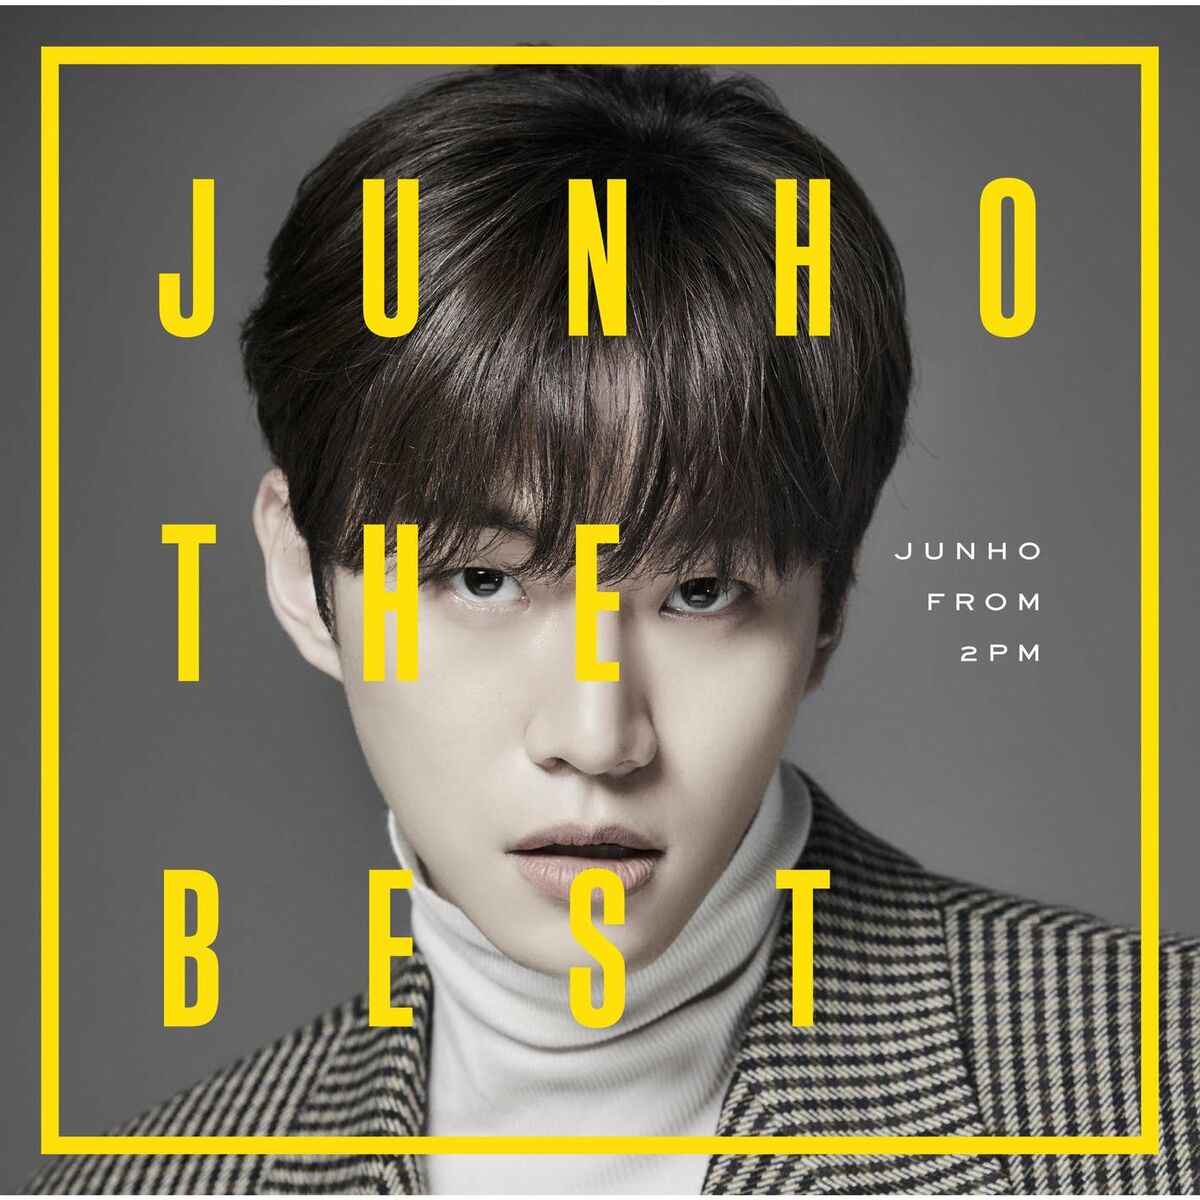 JUNHO (From 2PM): albums, songs, playlists | Listen on Deezer